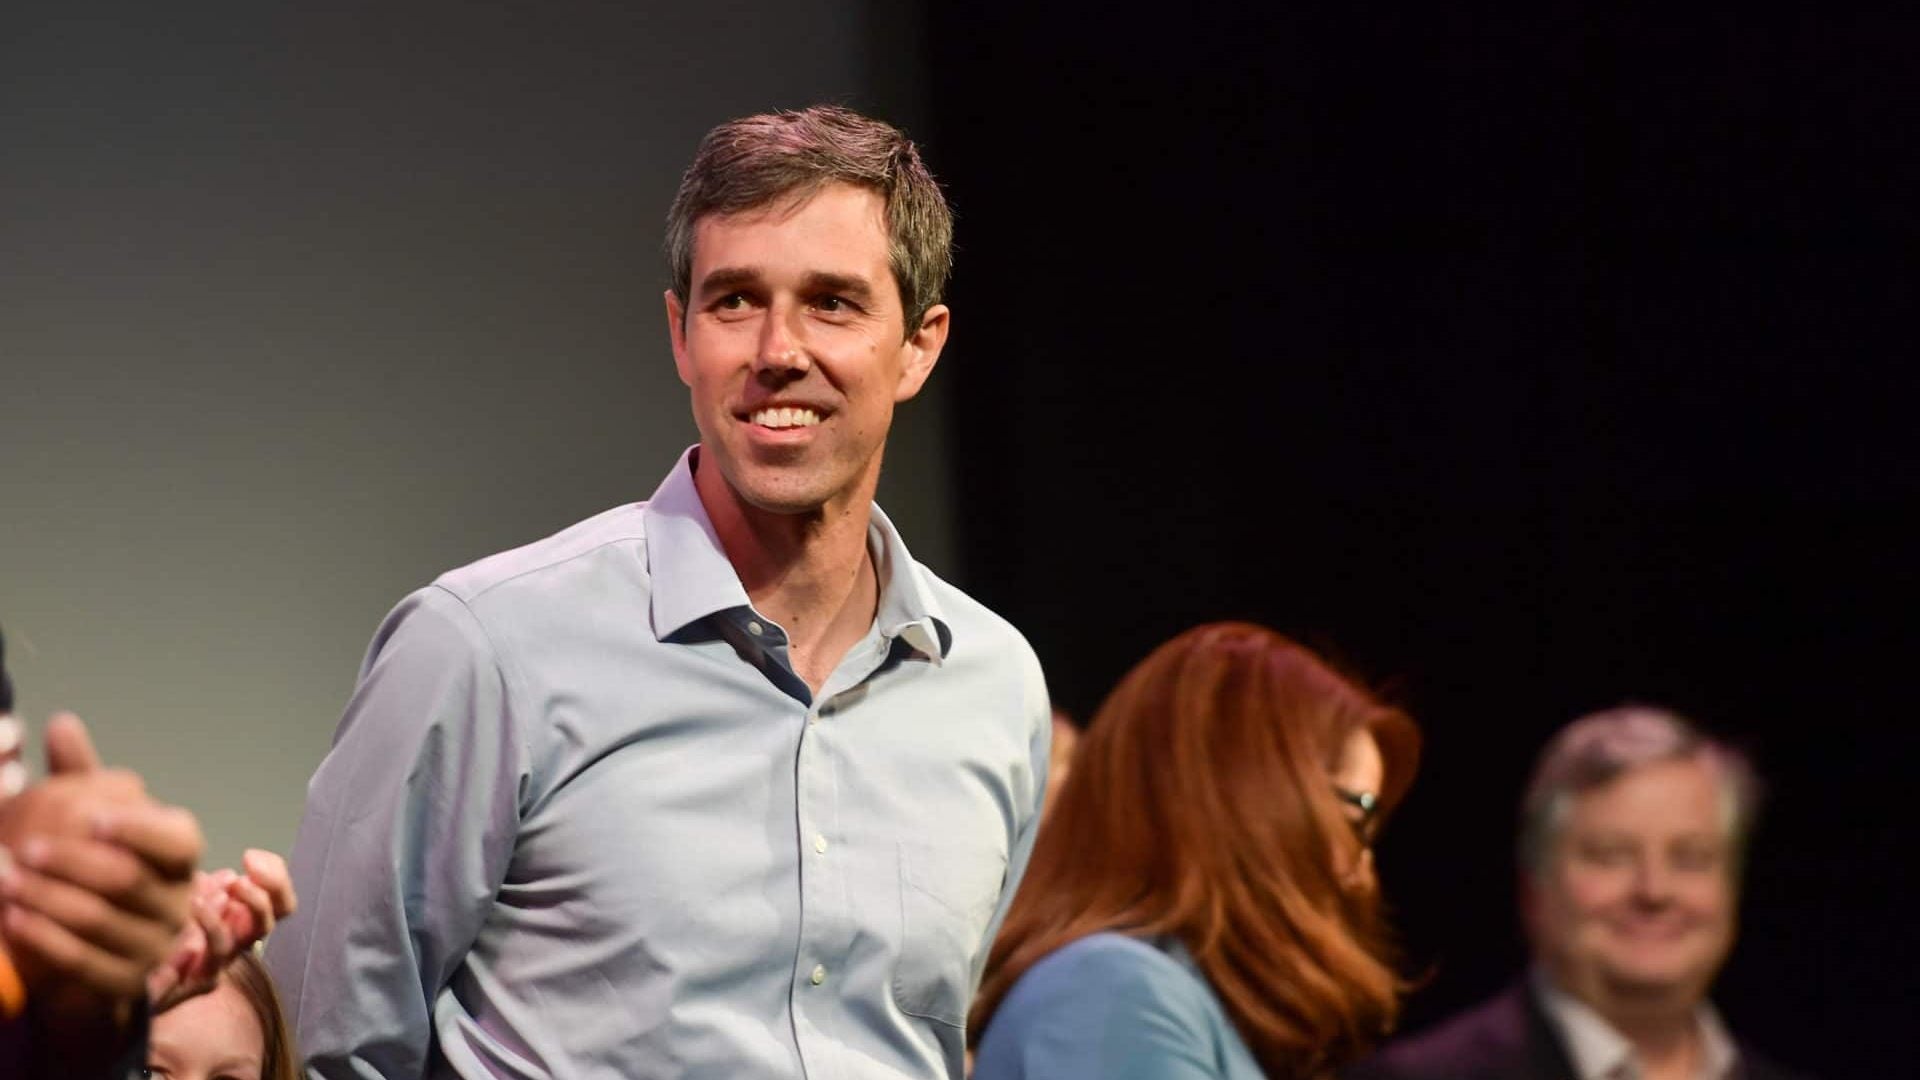 Beto O'Rourke Joins Crowded Democratic Field For 2020 Presidential Election